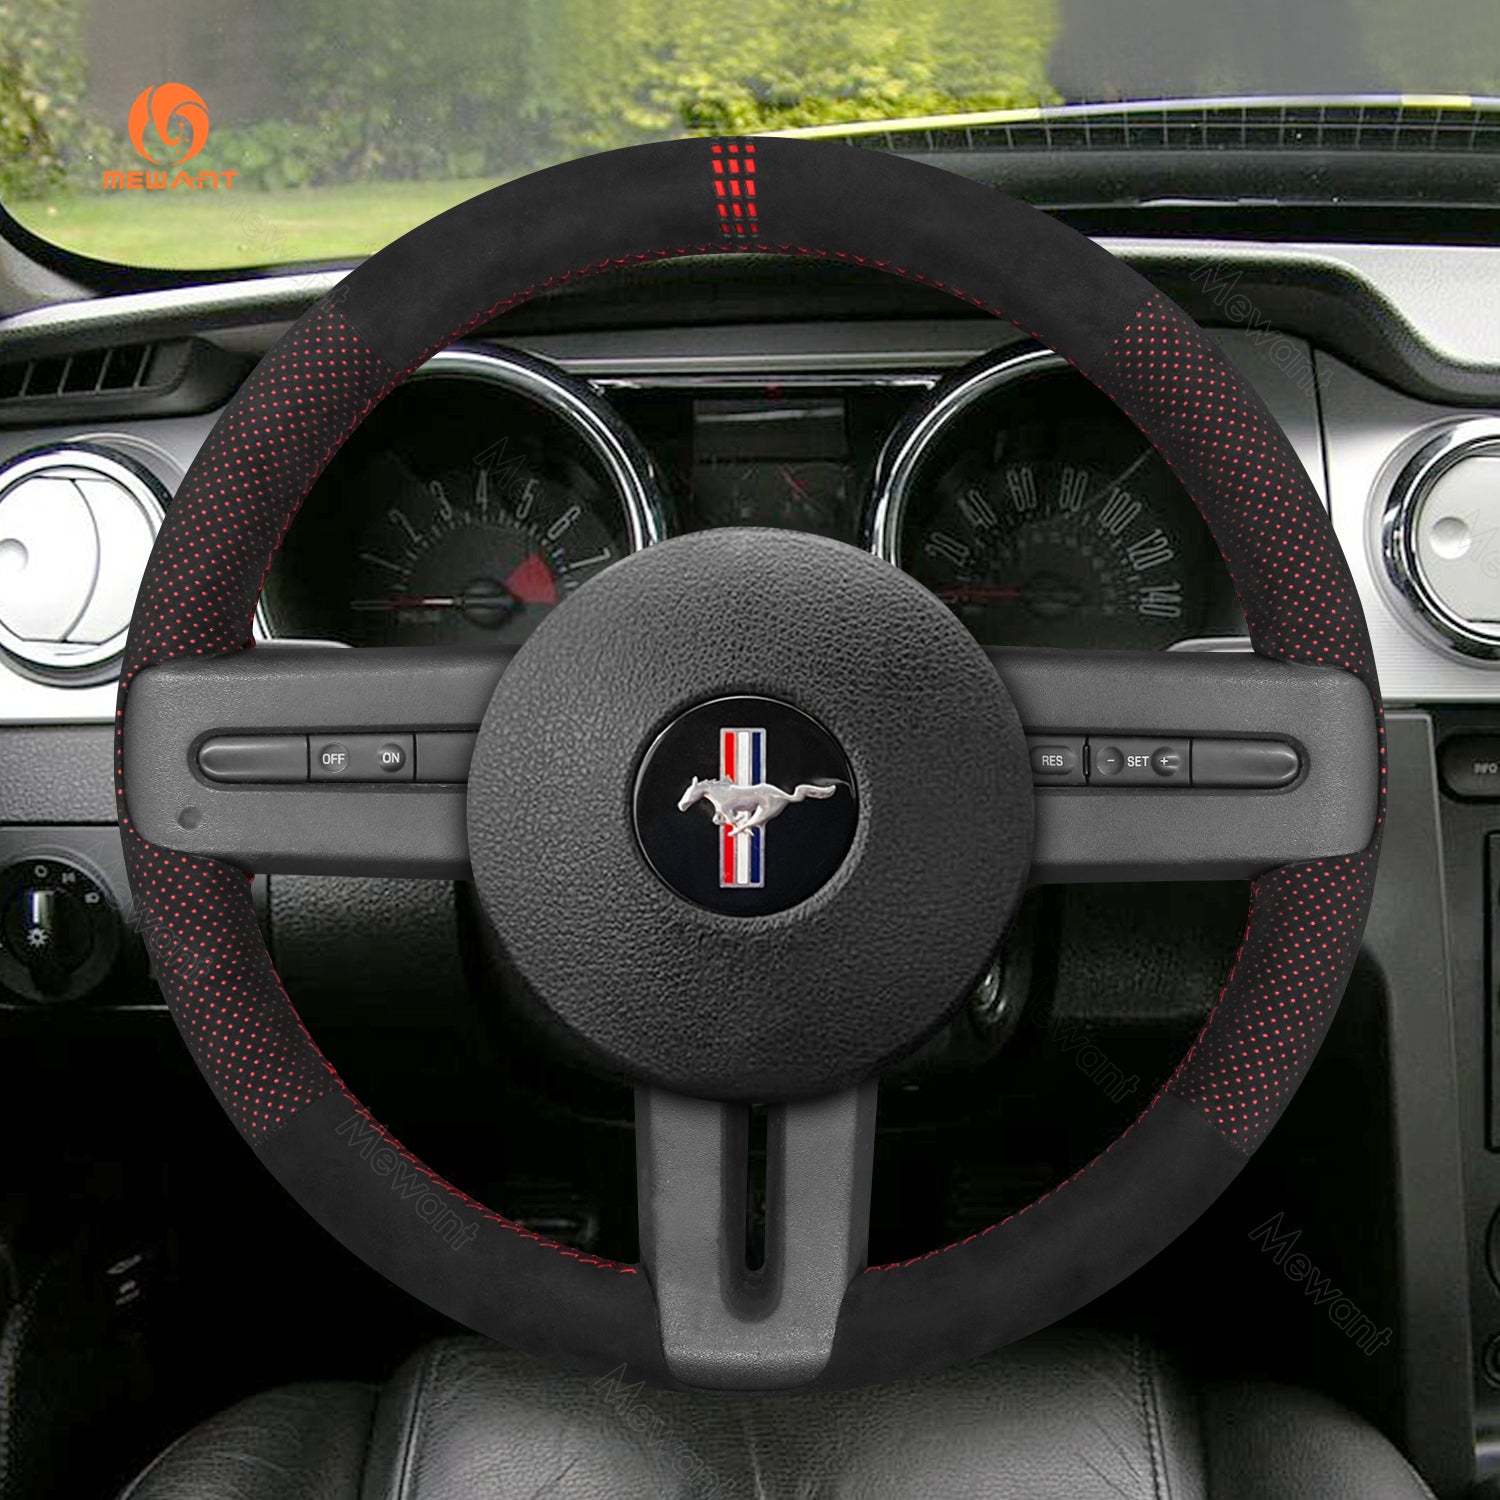 MEWANT Leather Suede Car Steering Wheel Cover for Ford Mustang 2005-2012